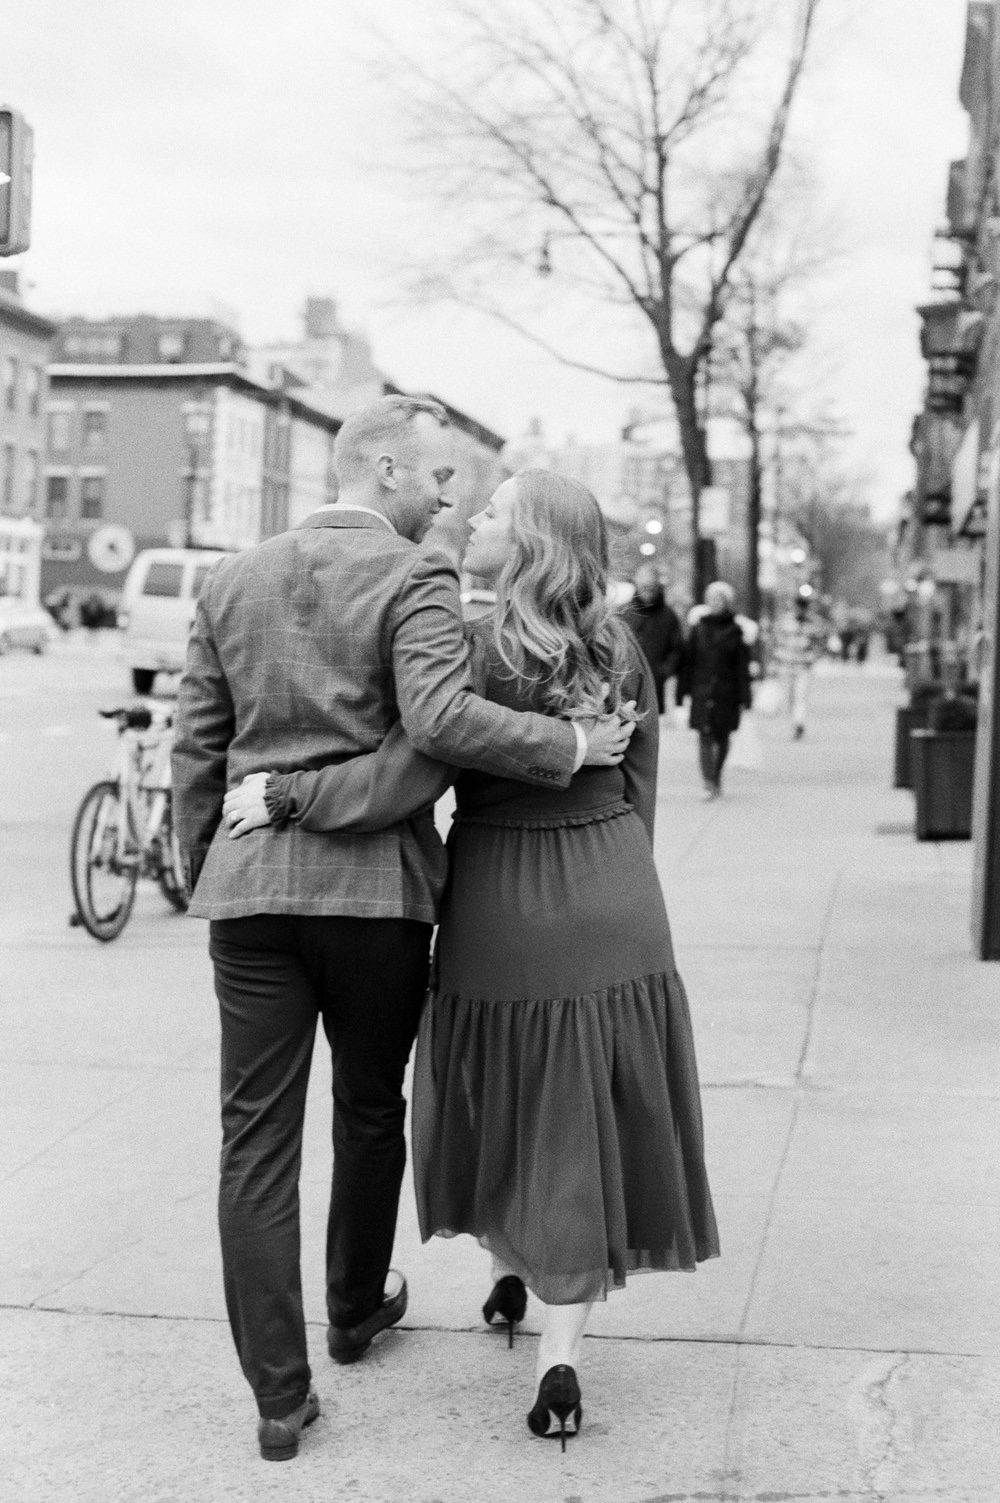 couple prospect heights brooklyn engagement session photos by Mary Dougherty